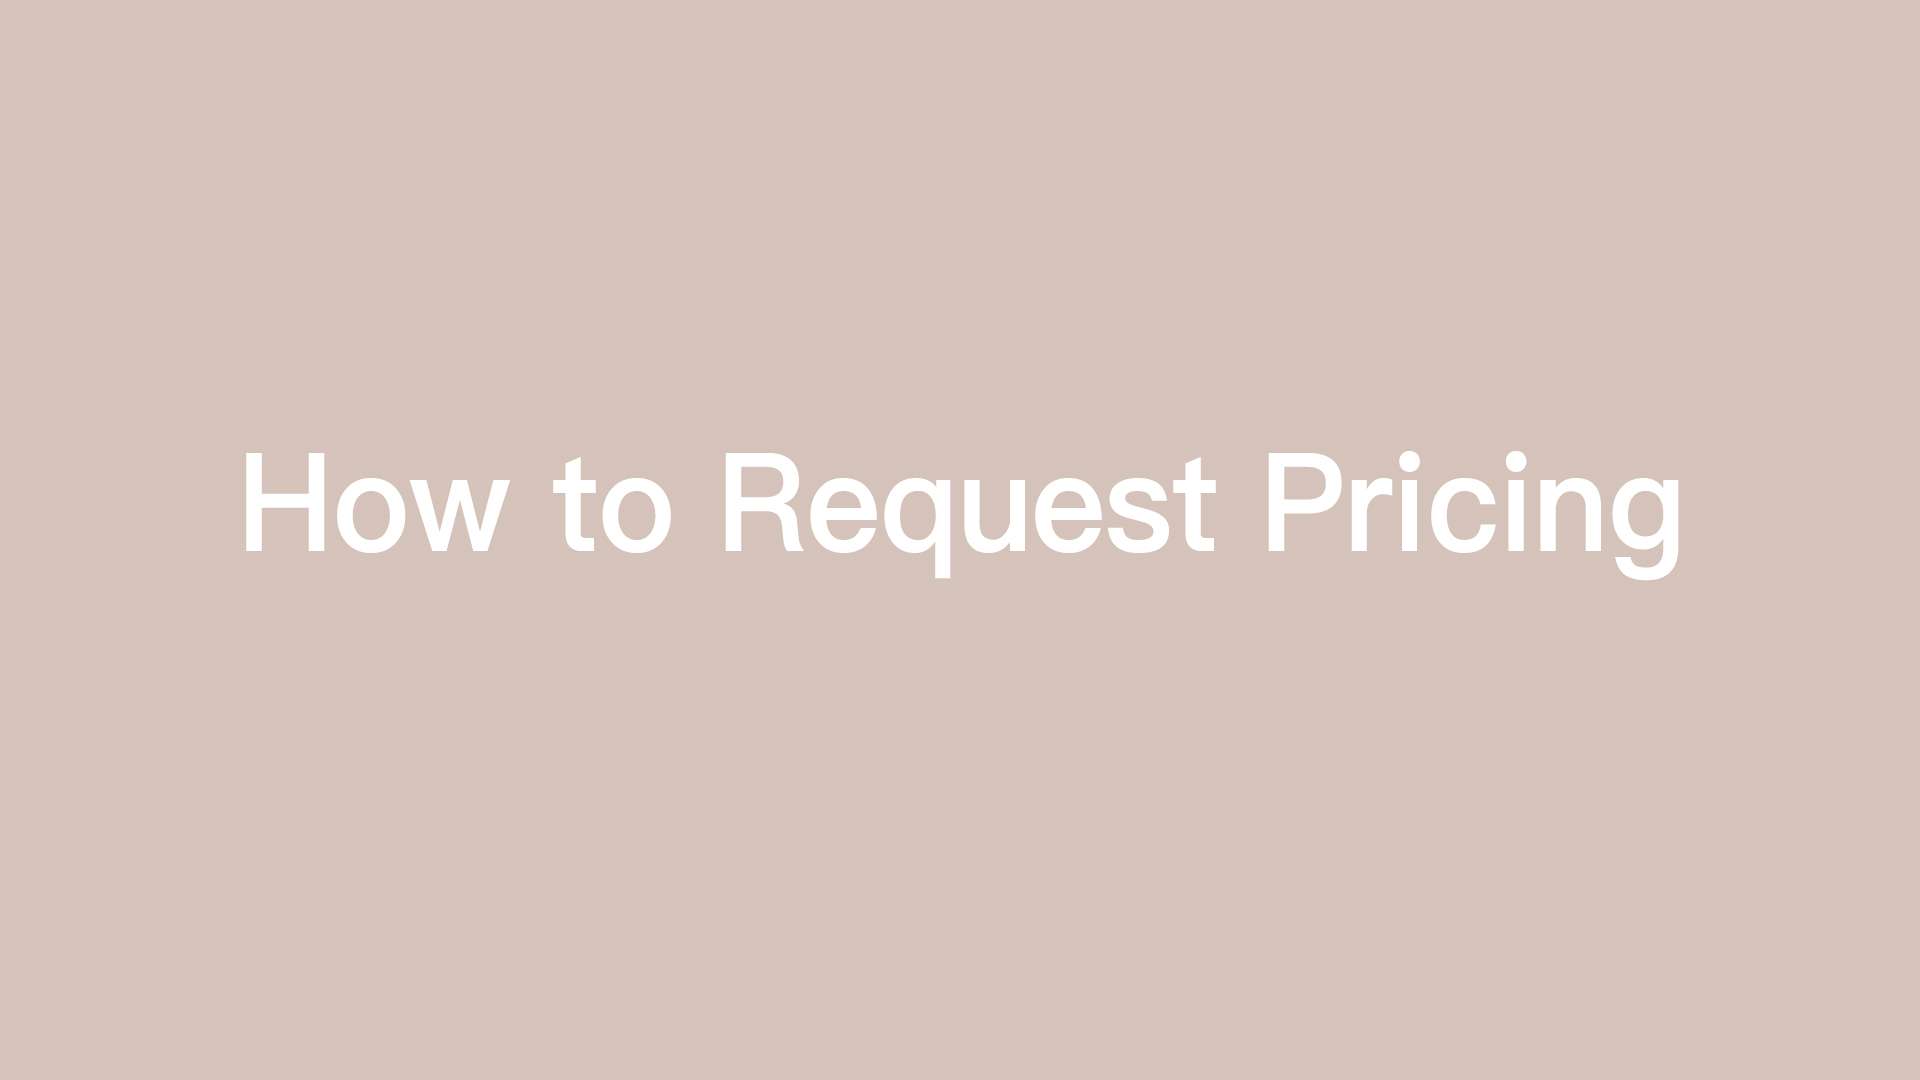 How to Request Pricing